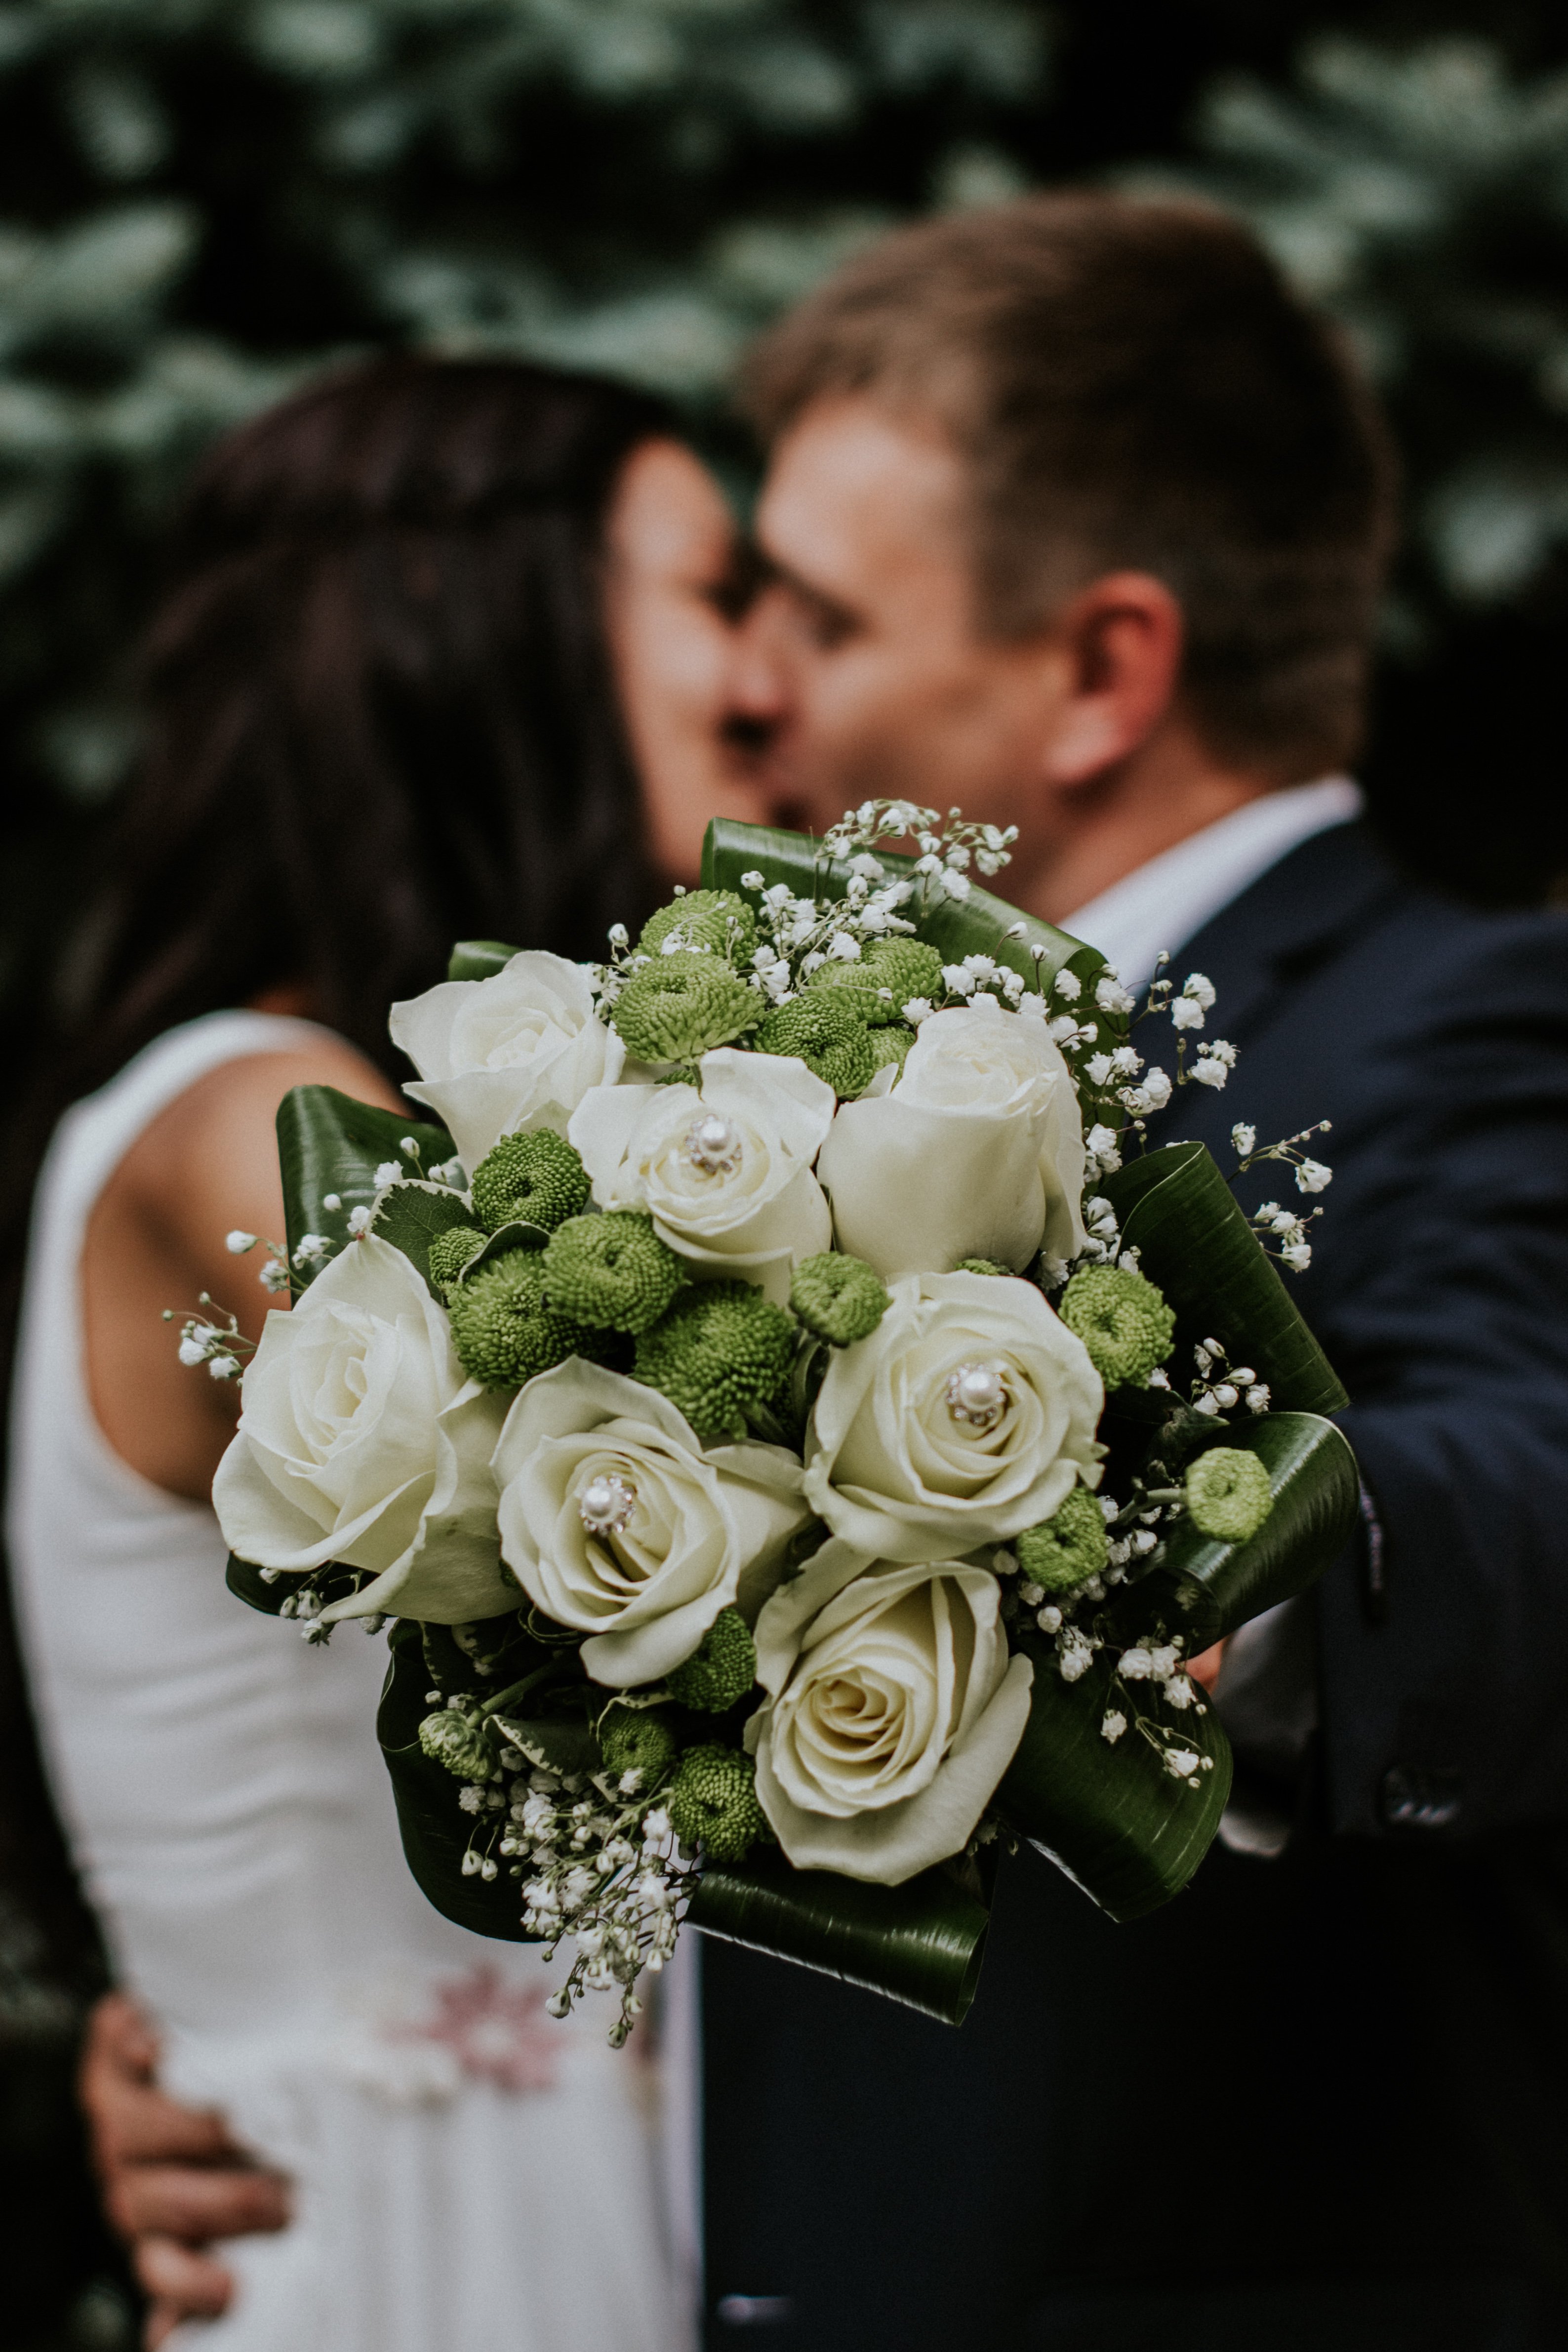 A couple in a wedding of their dreams | Photo: Pexels